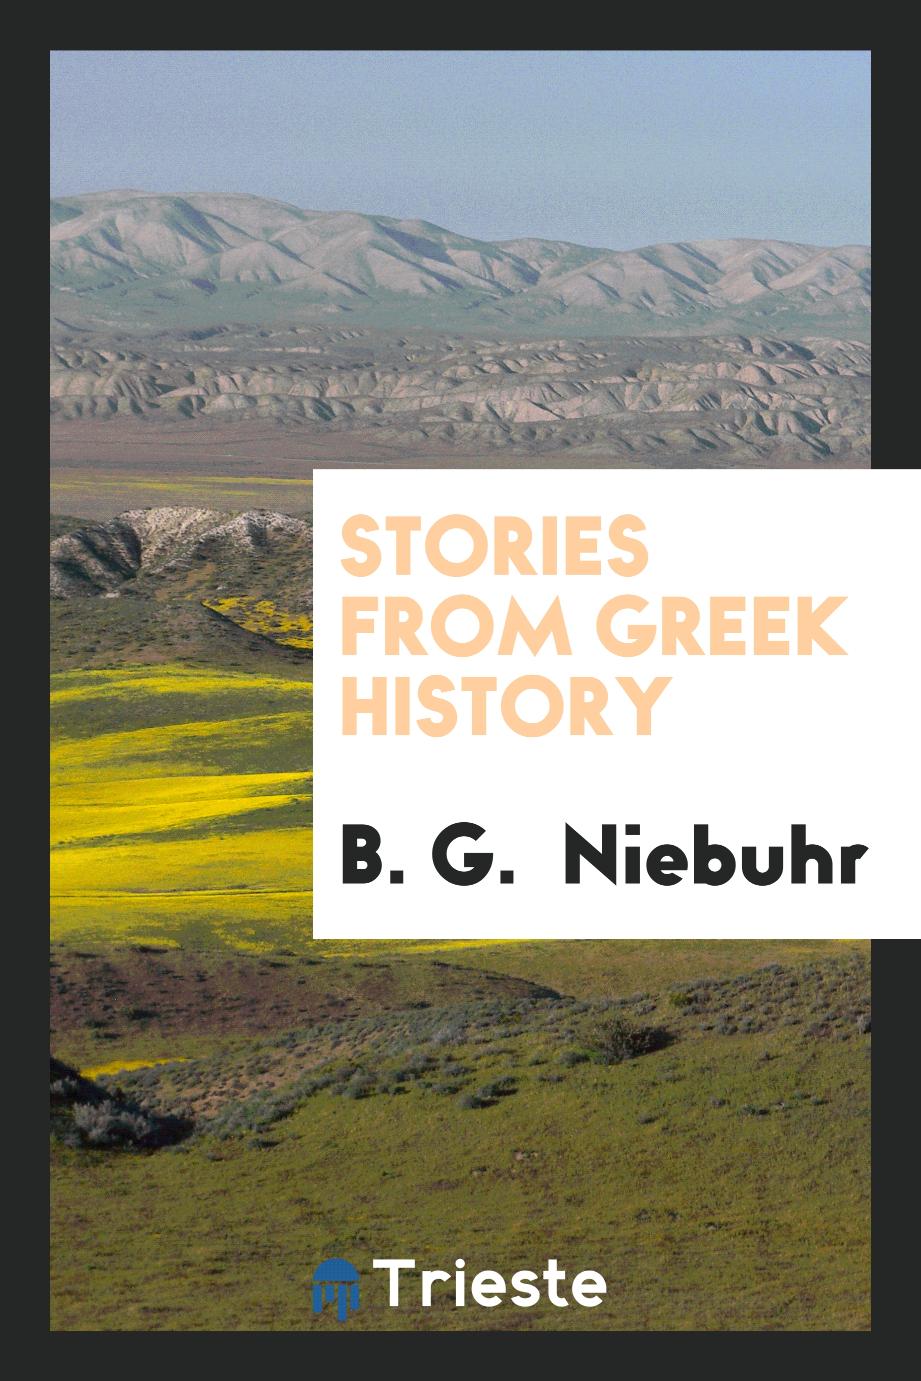 Stories from Greek history